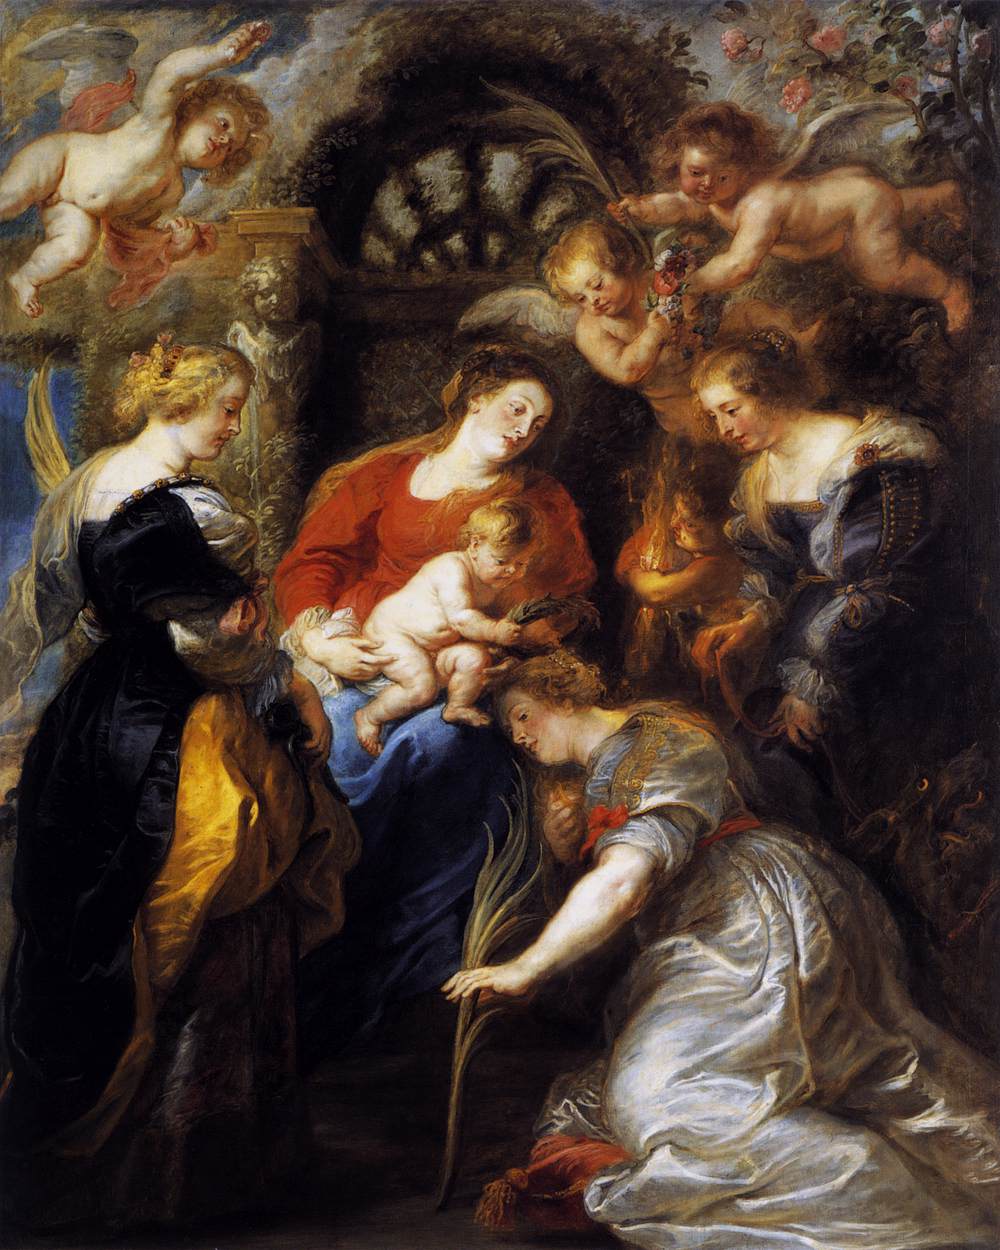 The Crowning of St. Catherine by Peter Paul Rubens Reproduction Oil Painting on Canvas